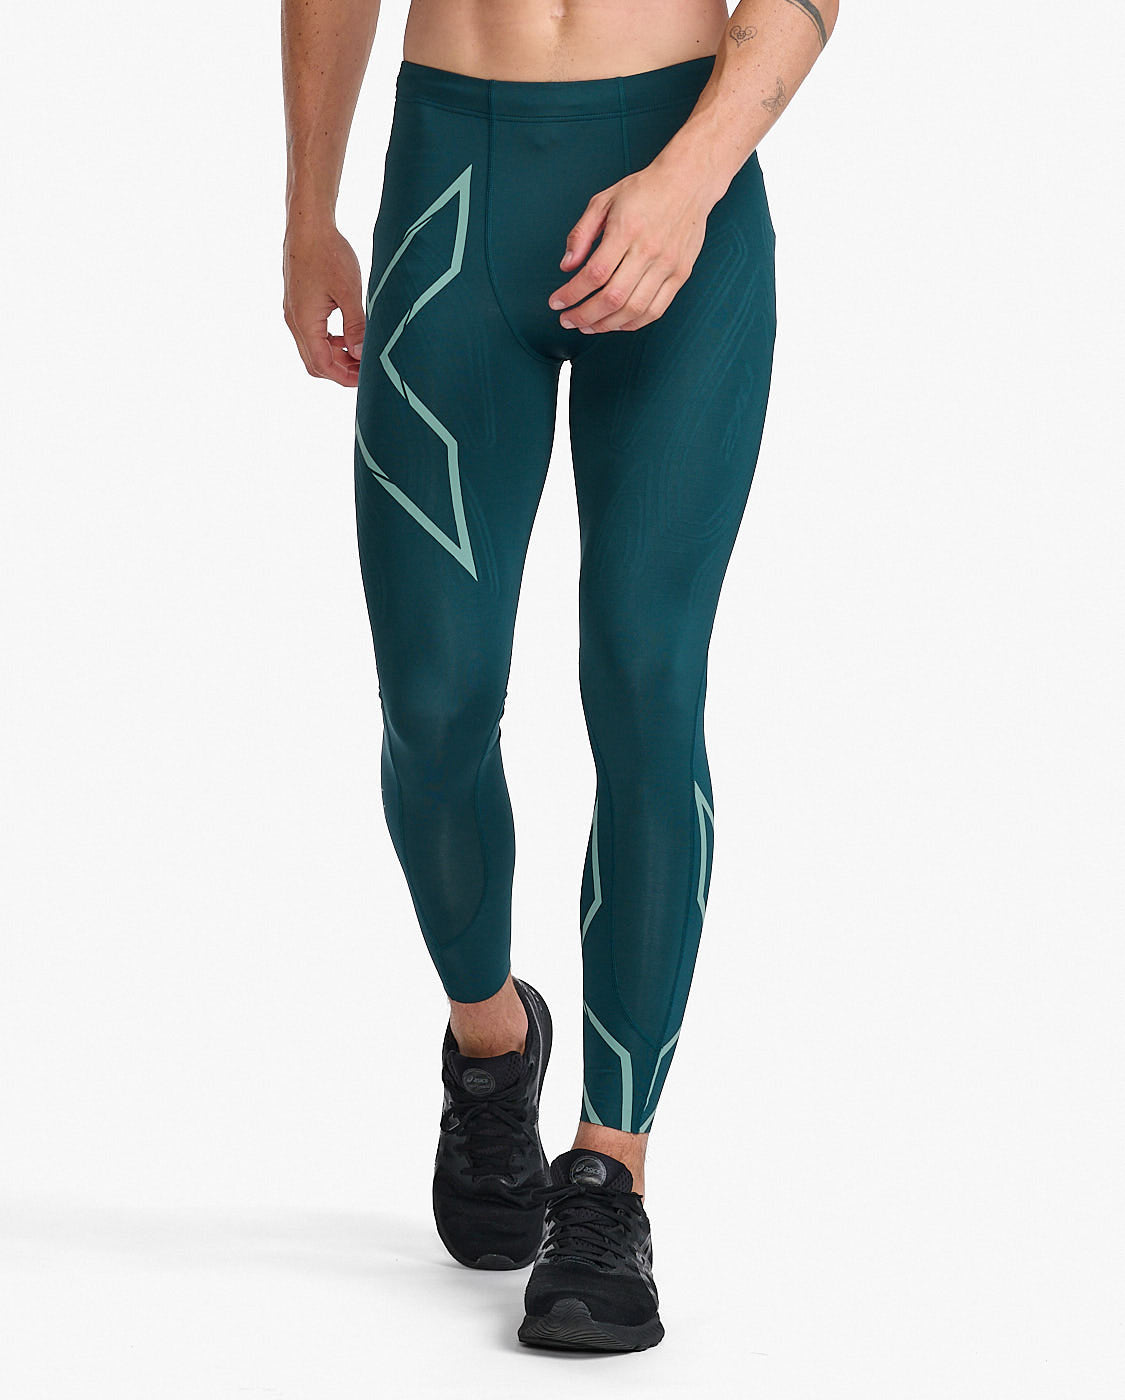 2XU tights: compression, comfort, fit and style - Canadian Running